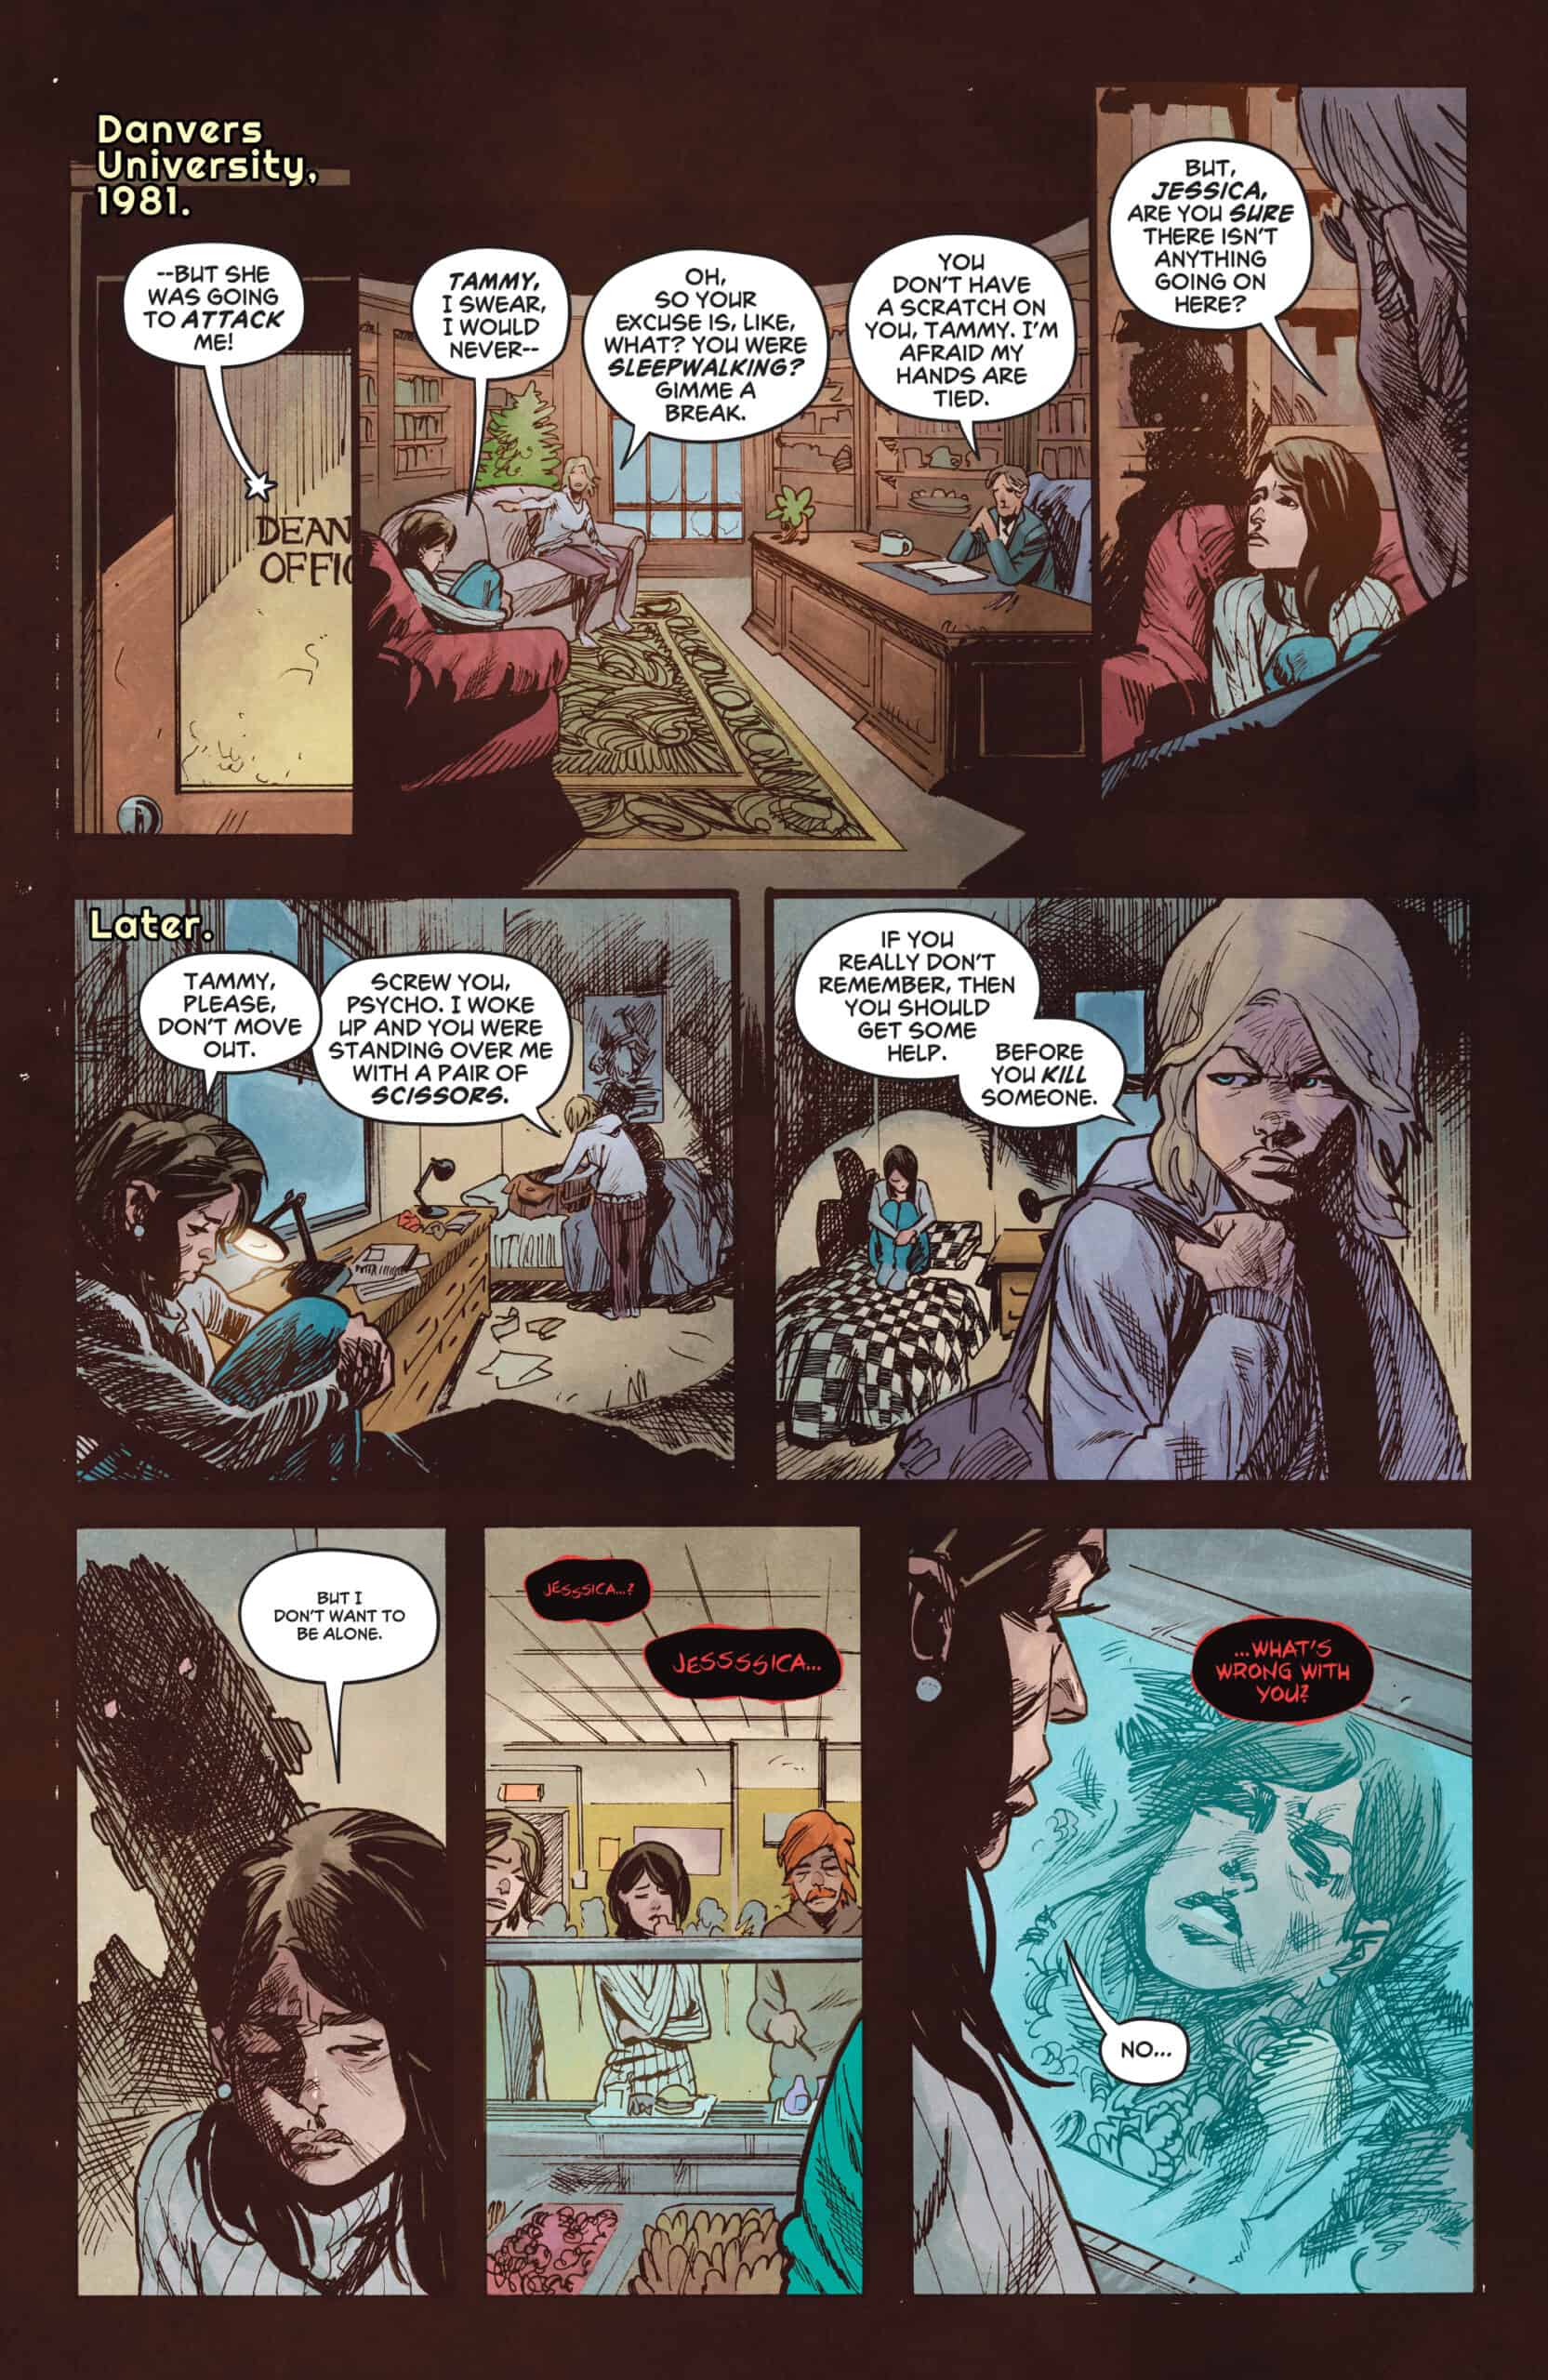 DC Horror Presents: The Conjuring: The Lover #3: Non-Stop Terror - Comic  Watch